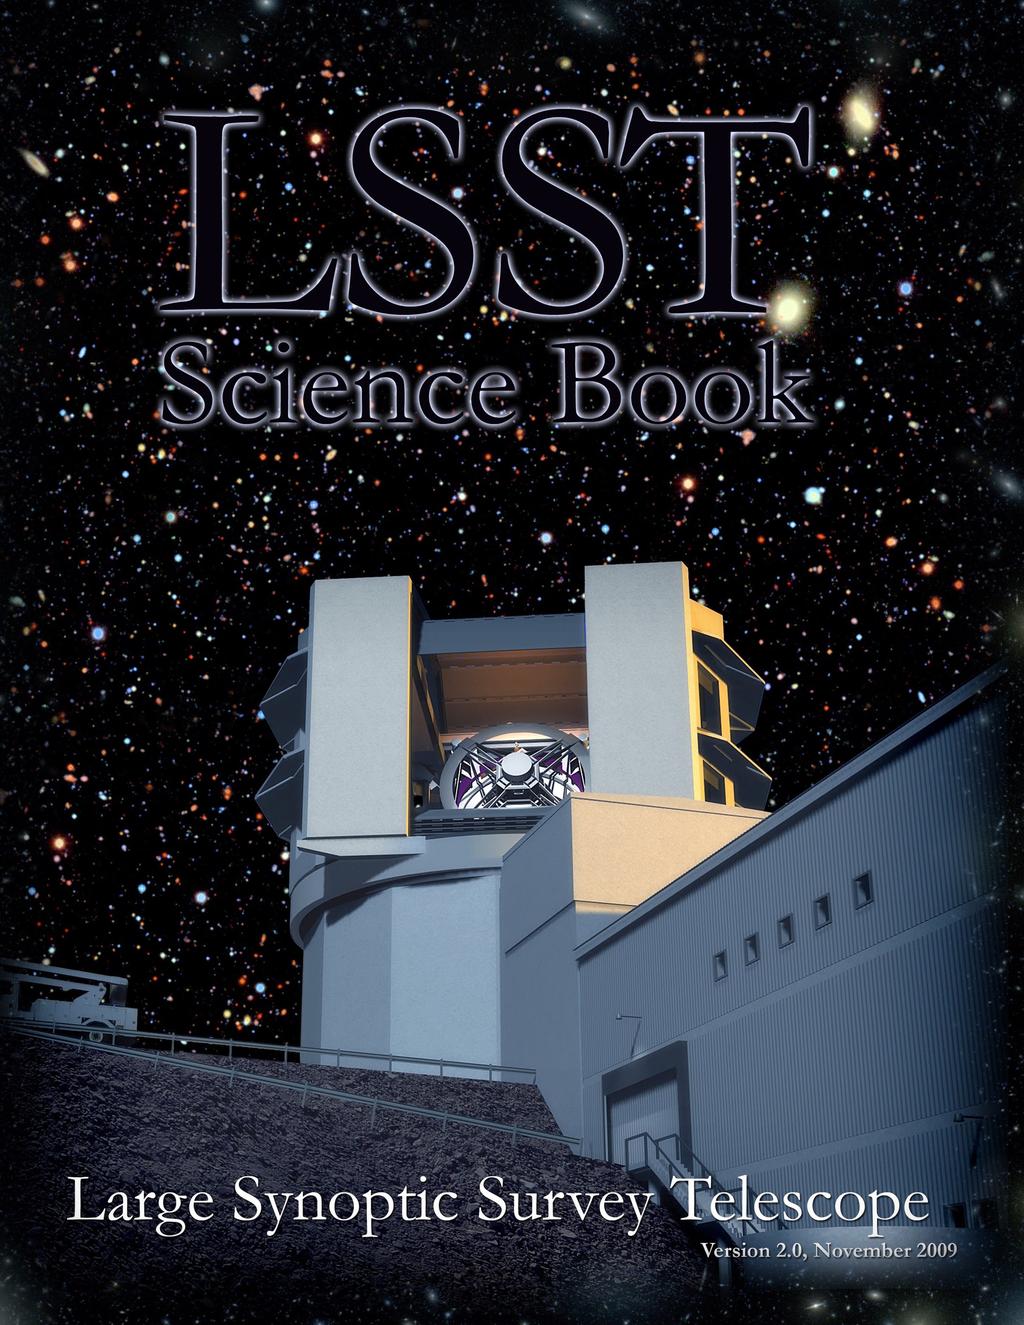 LSST Science Themes Dark matter, dark energy, cosmology (spatial distribution of galaxies, gravitational lensing, supernovae, quasars) Time domain (cosmic explosions, variable stars, proper motions)